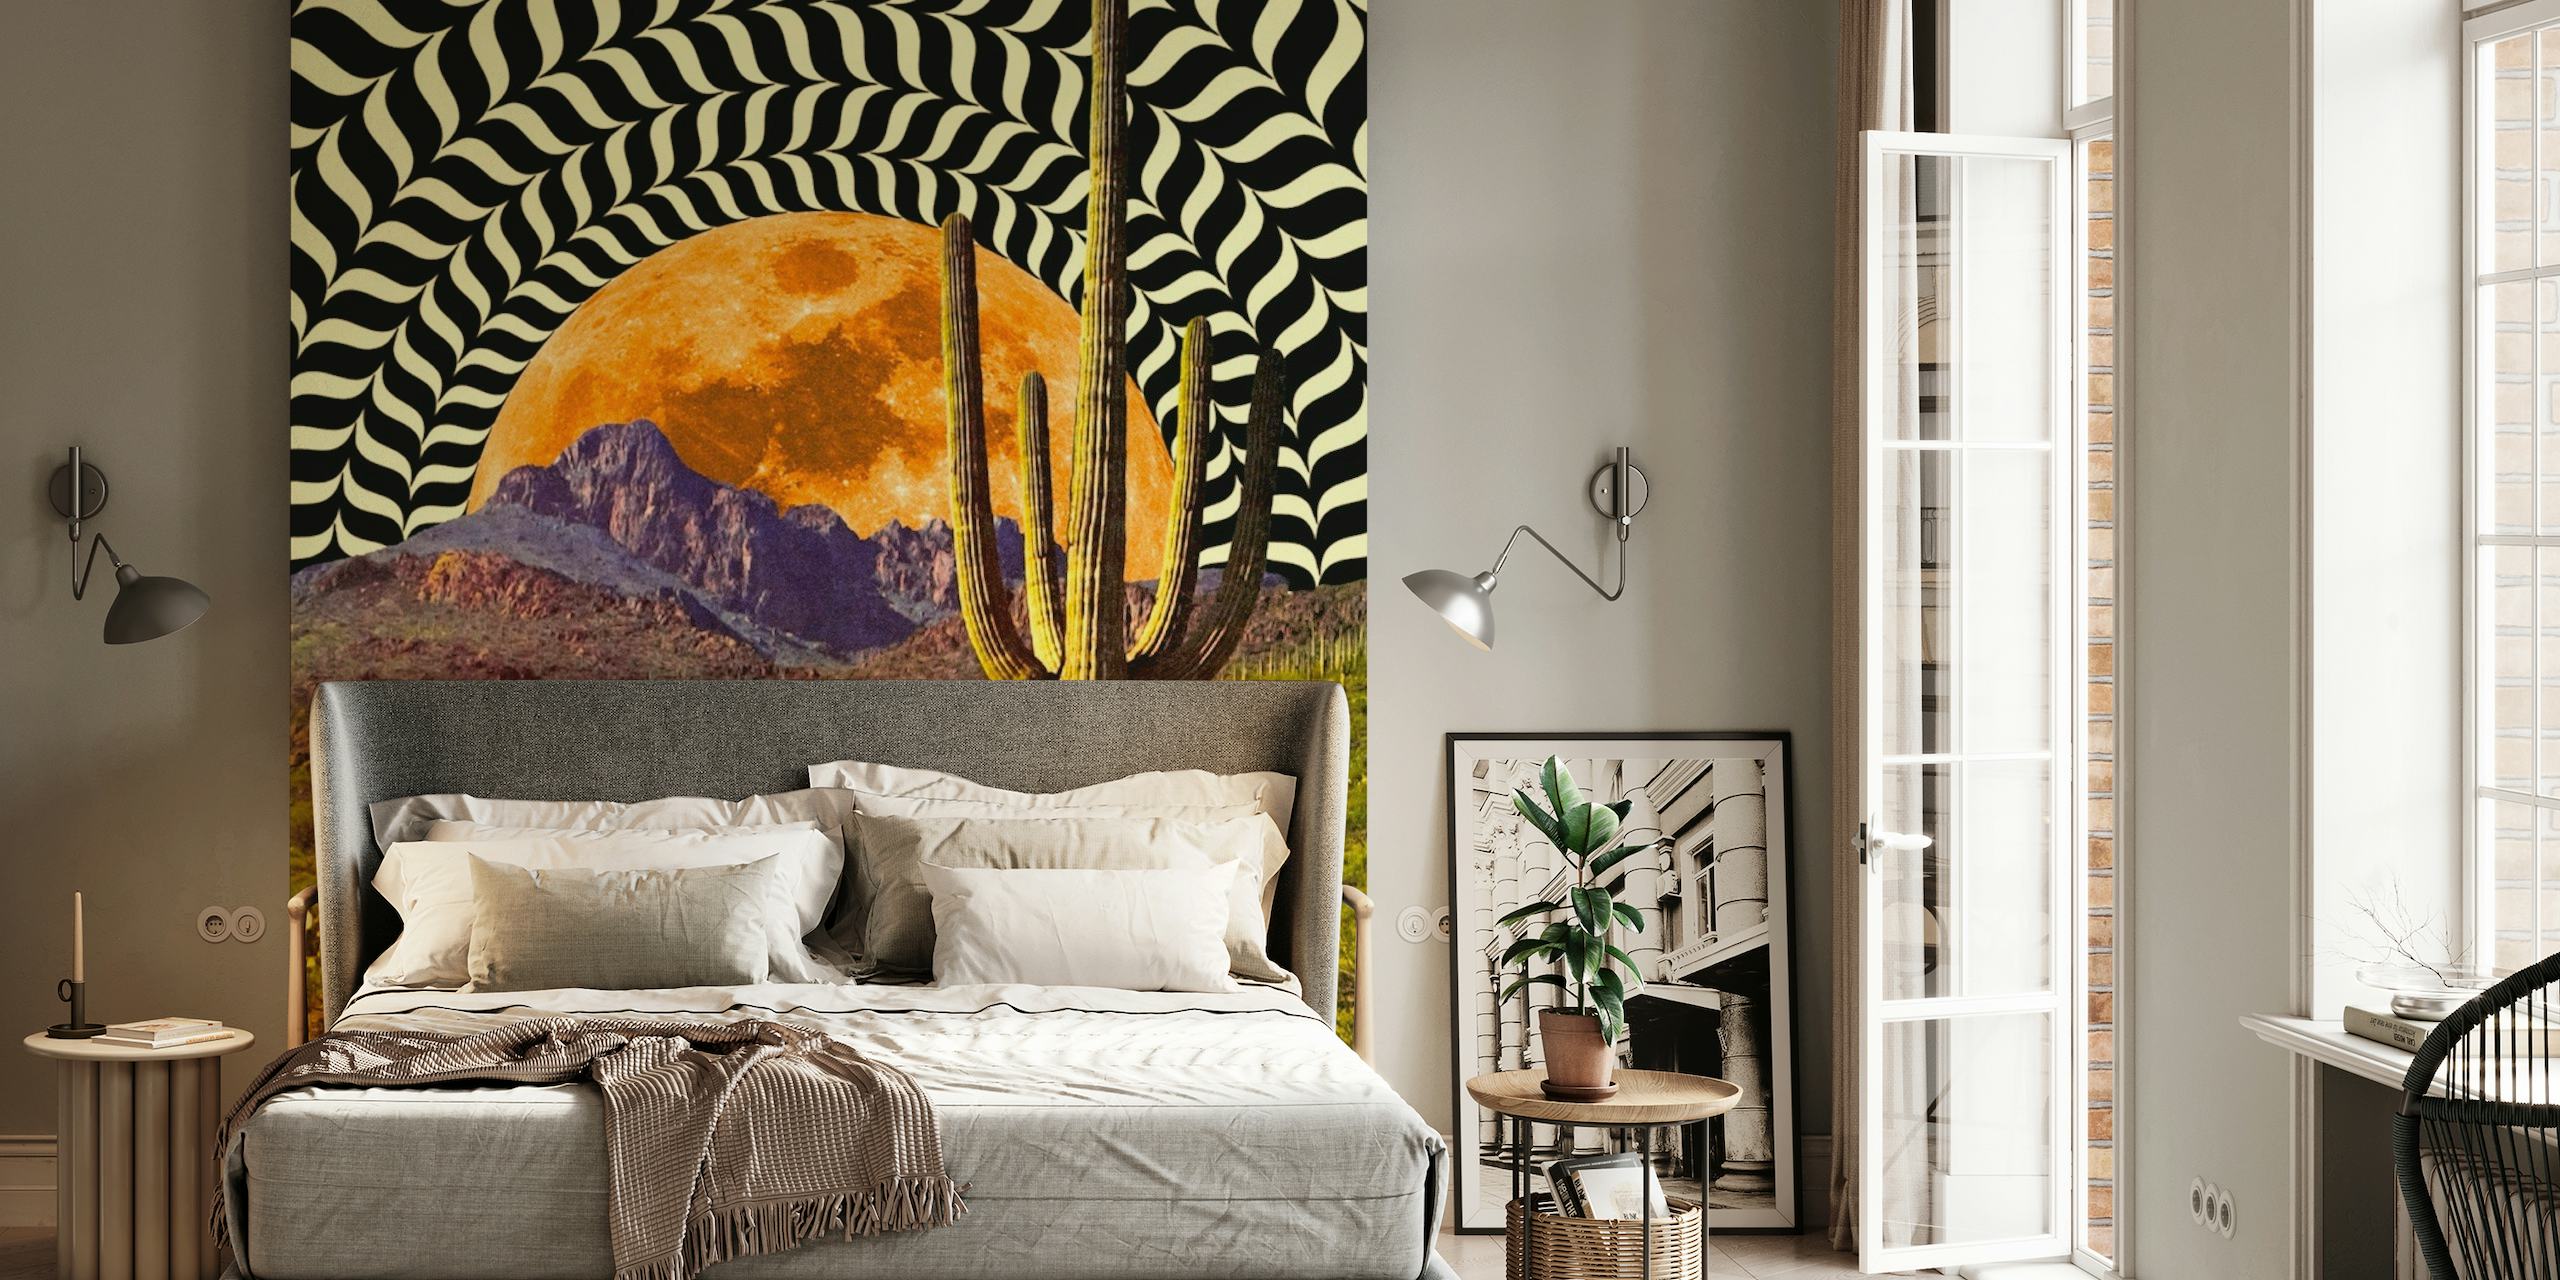 Optical illusion wall mural with cowboys and giant moon in desert scene